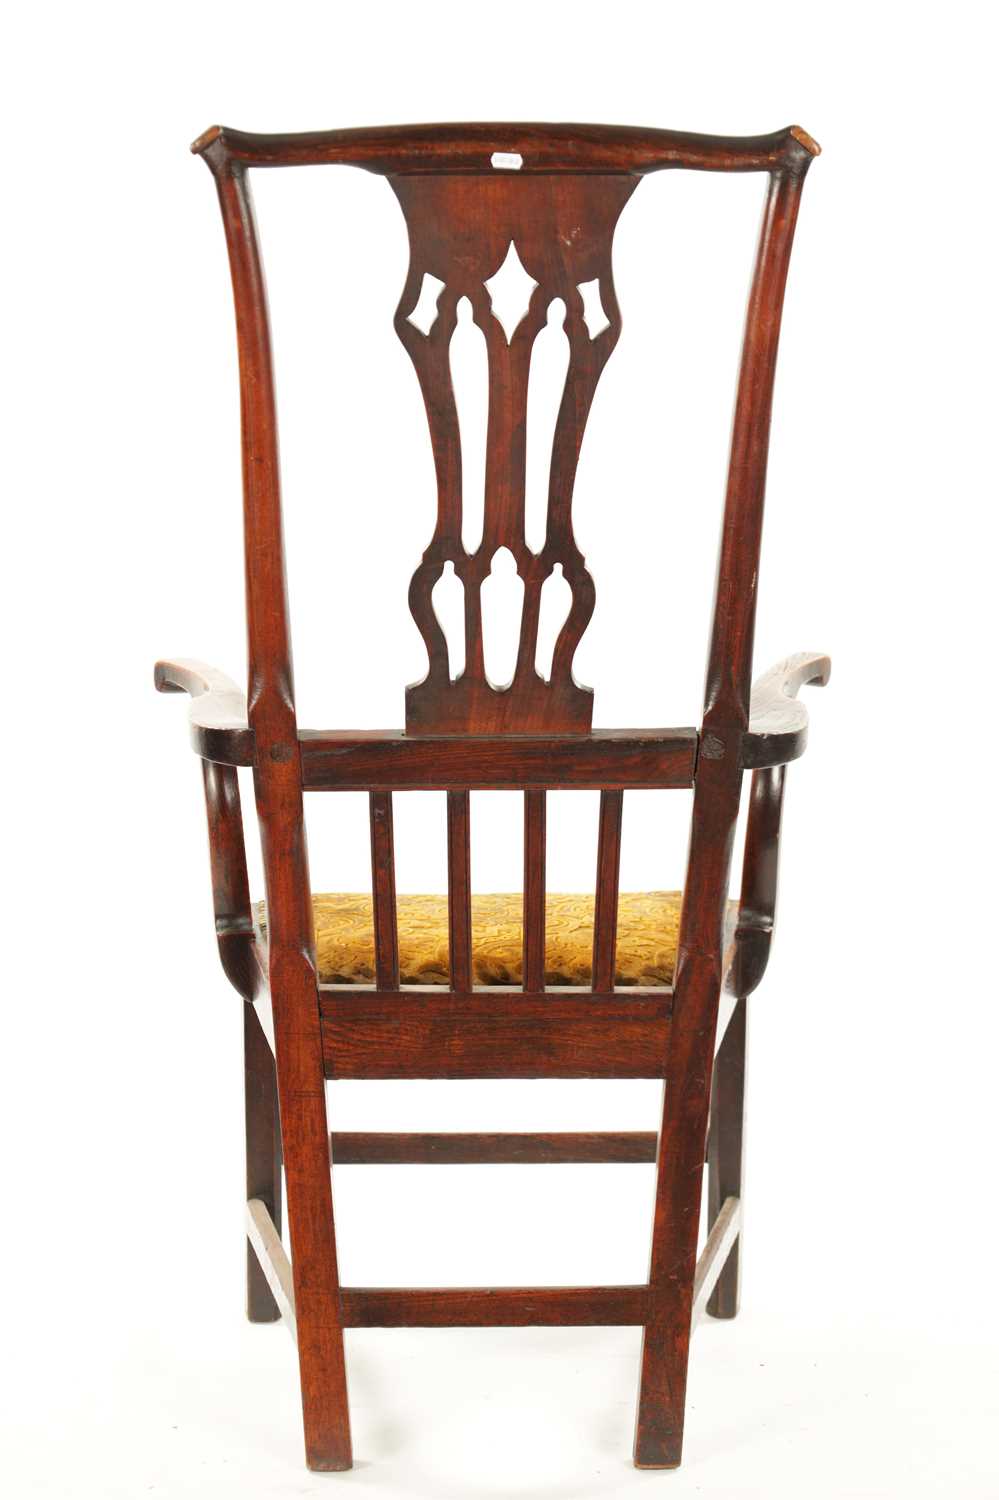 AN UNUSUAL 18TH CENTURY TALL BACK COUNTRY ELM SPLAT BACK ARMCHAIR - Image 7 of 7